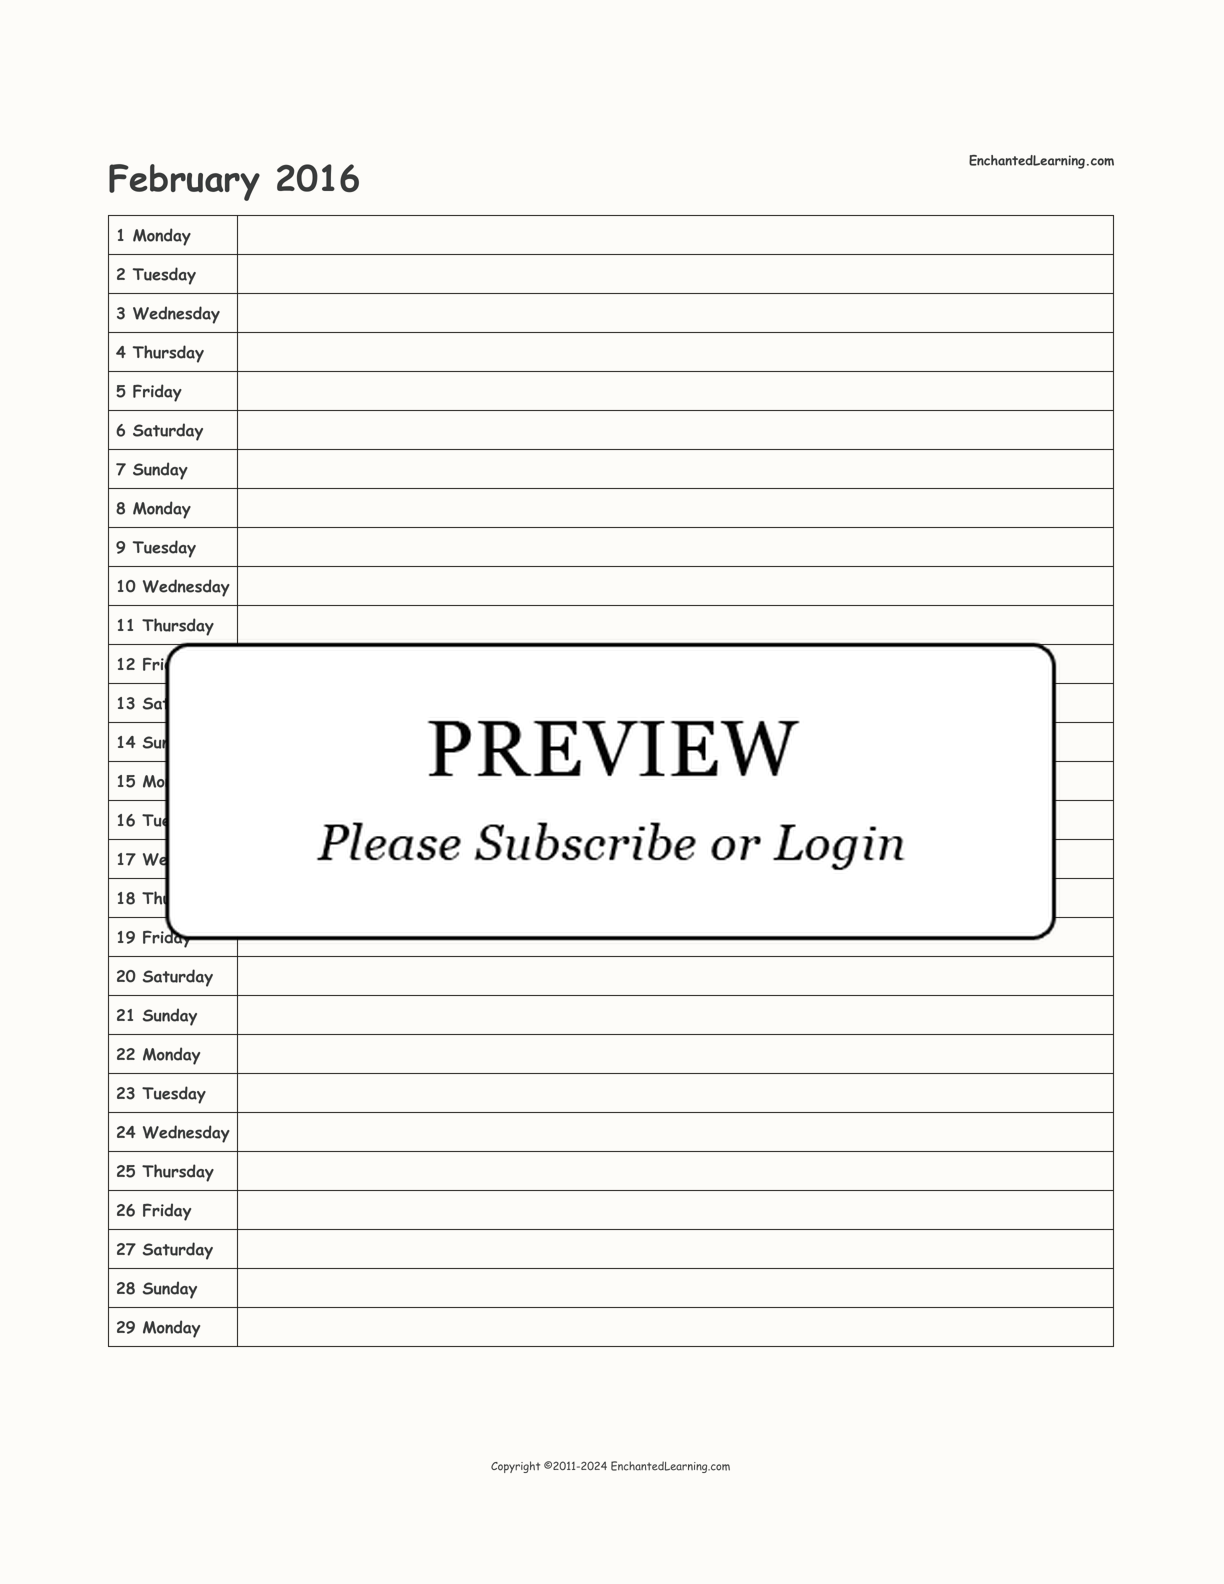 2016 Scheduling Calendar interactive printout page 2